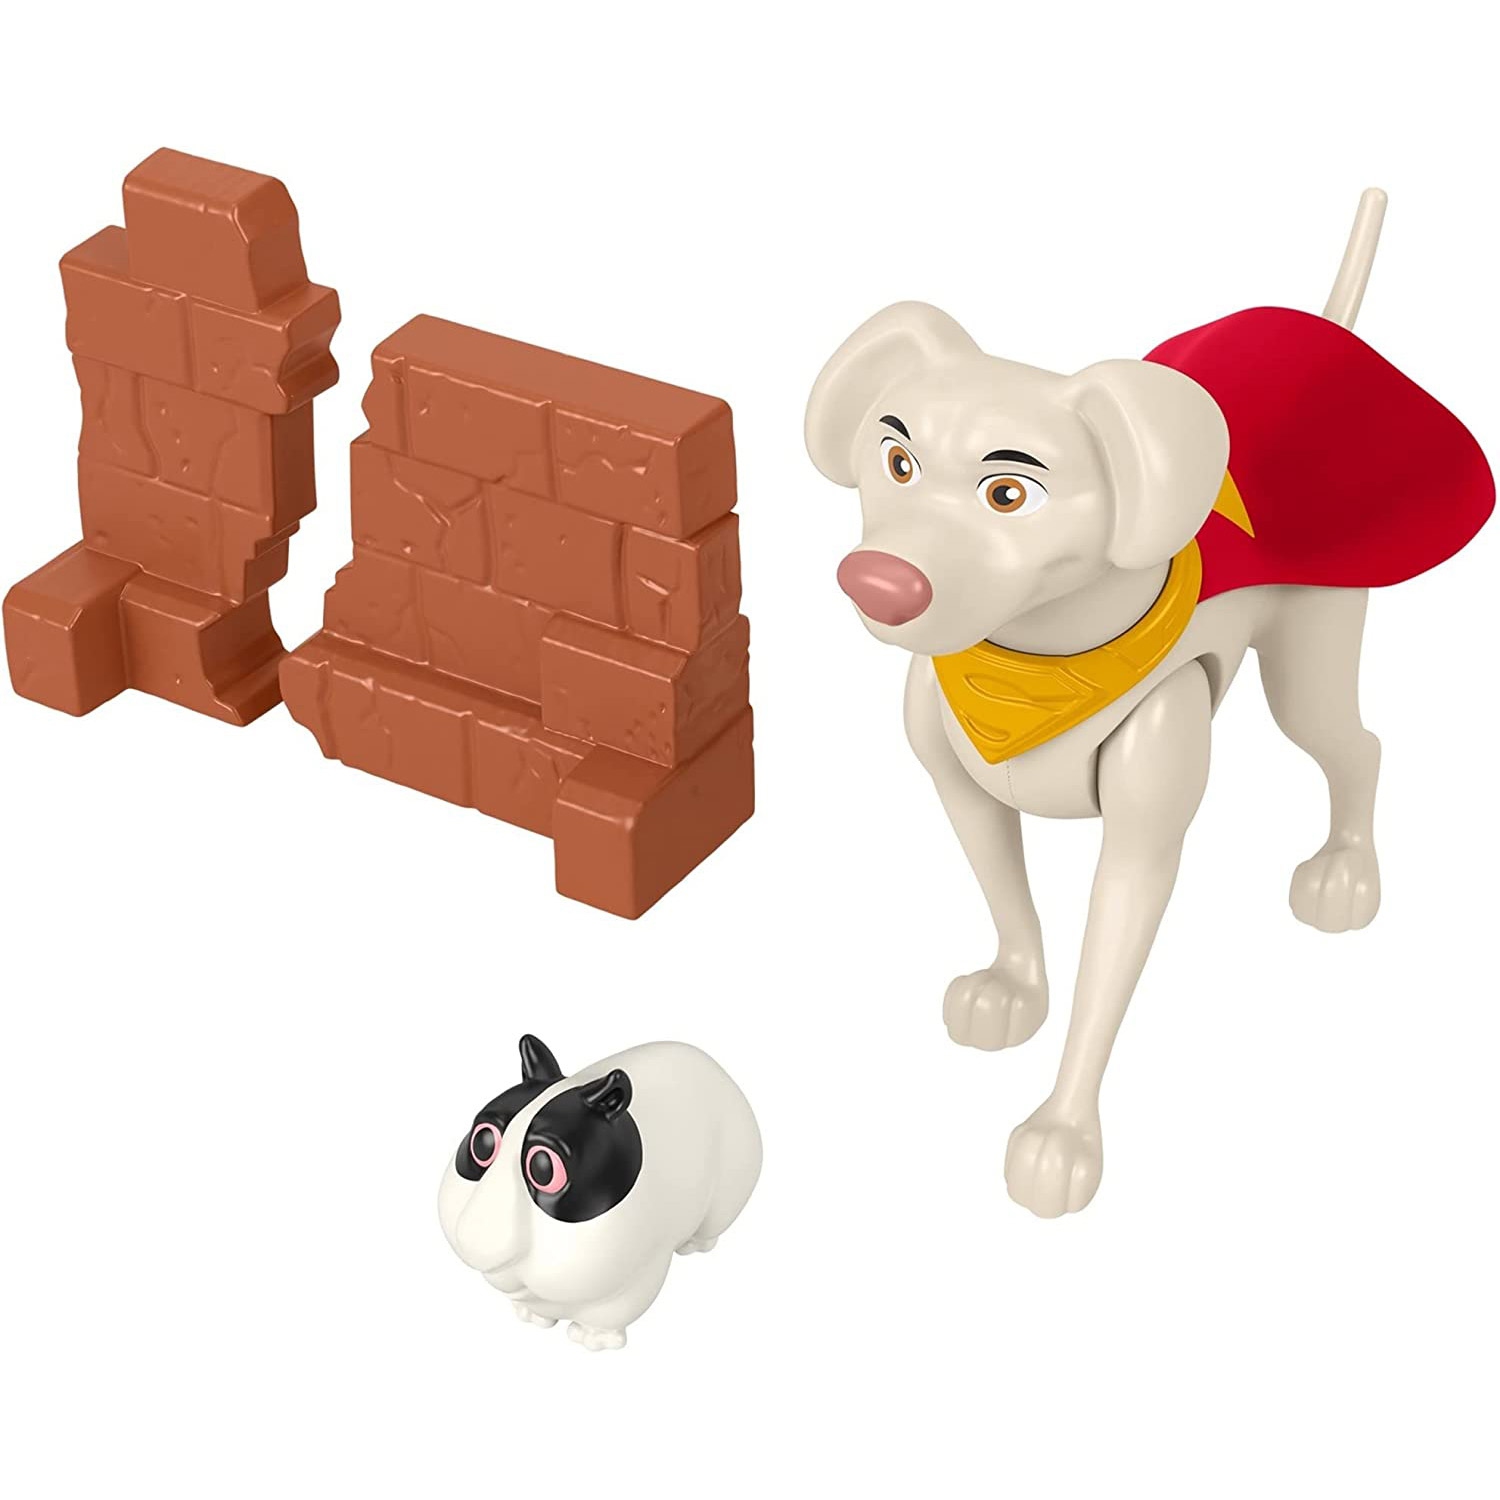 Fisher-Price DC League of Super-Pets Hero Punch Krypto, figure set with dog and accessories